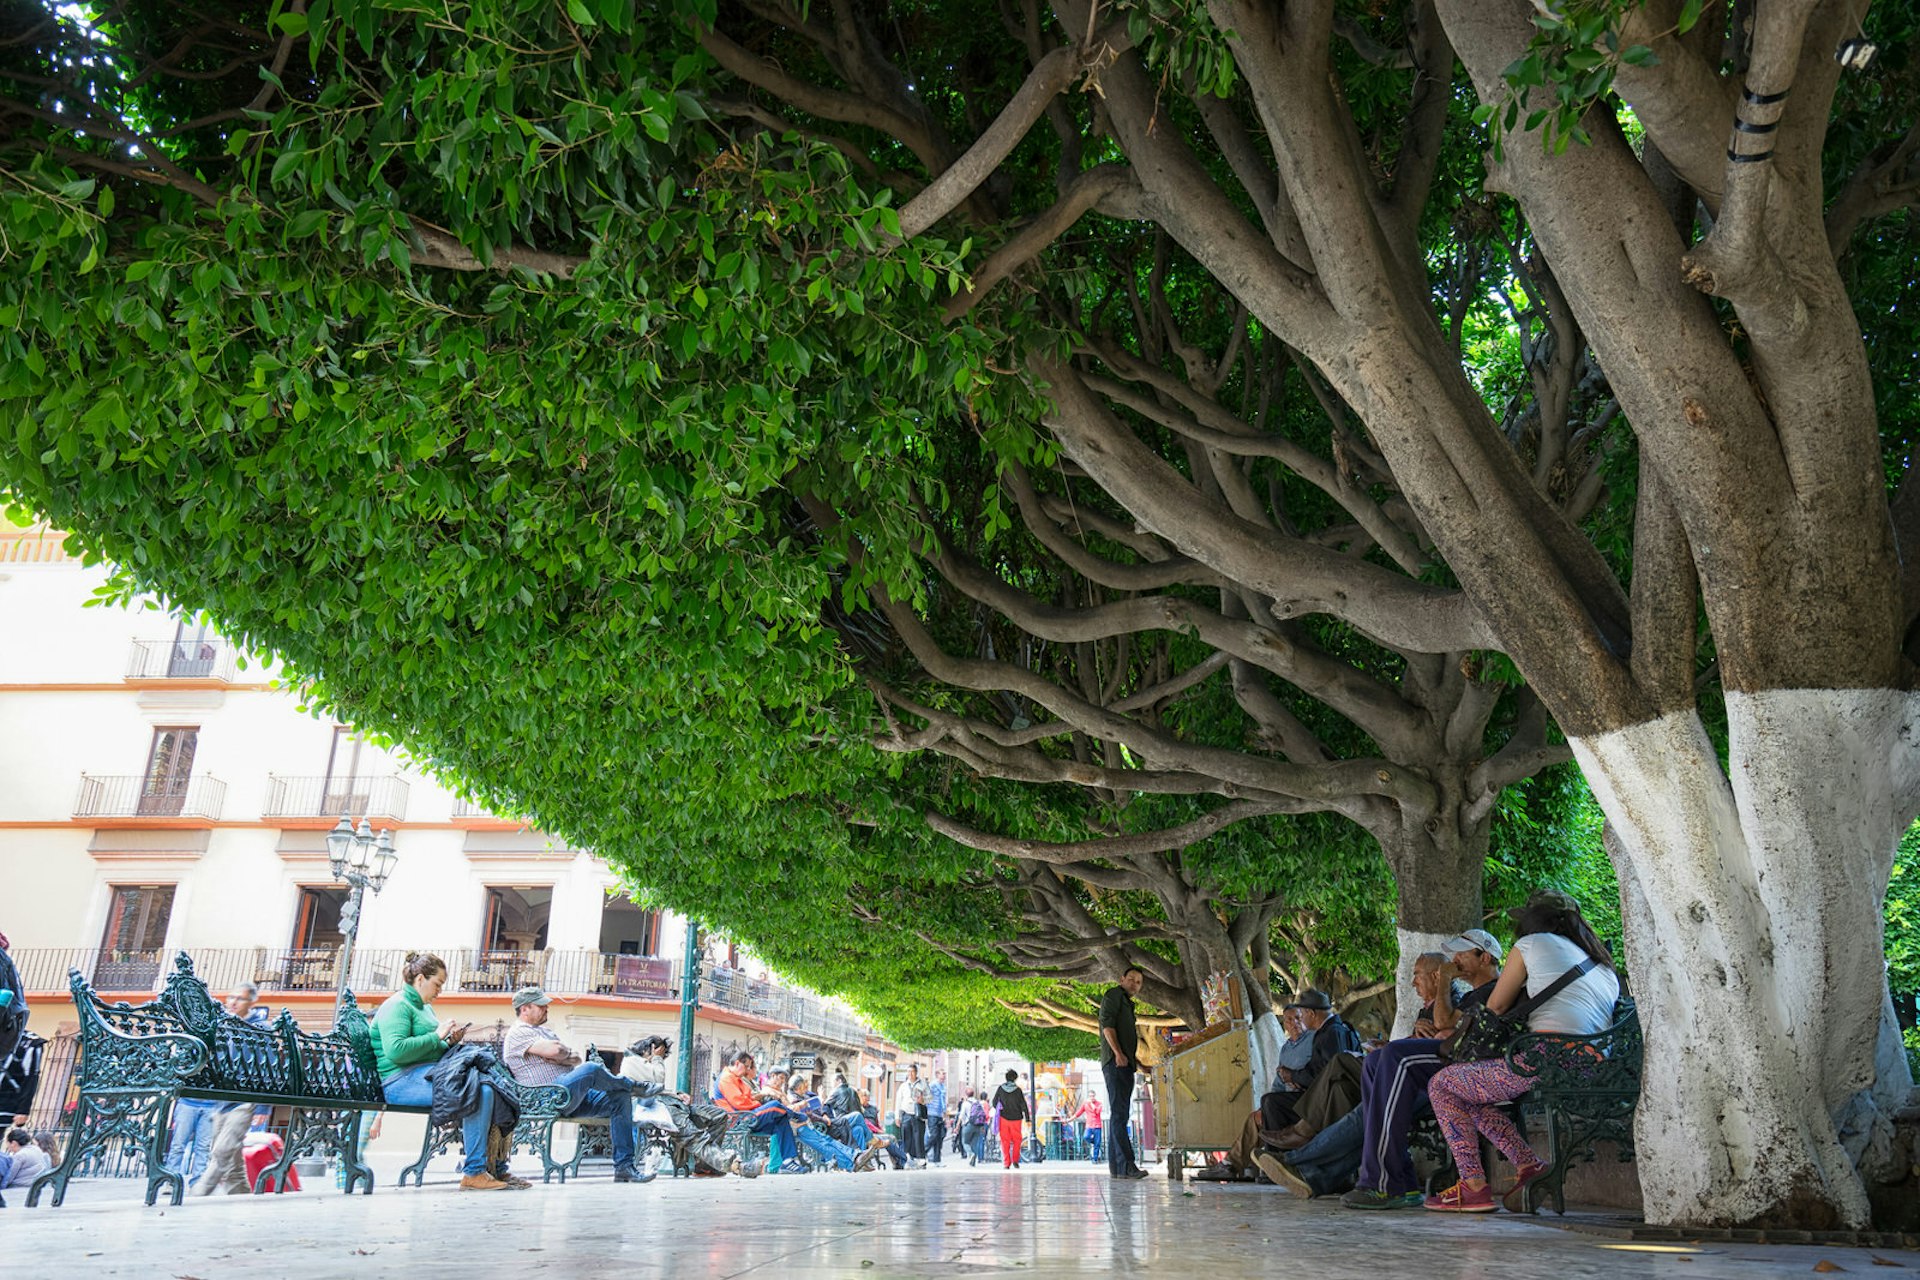 People relaxing under the low hanging trees in the midday sun at Plaza de la Union in Guanajuato Mexico